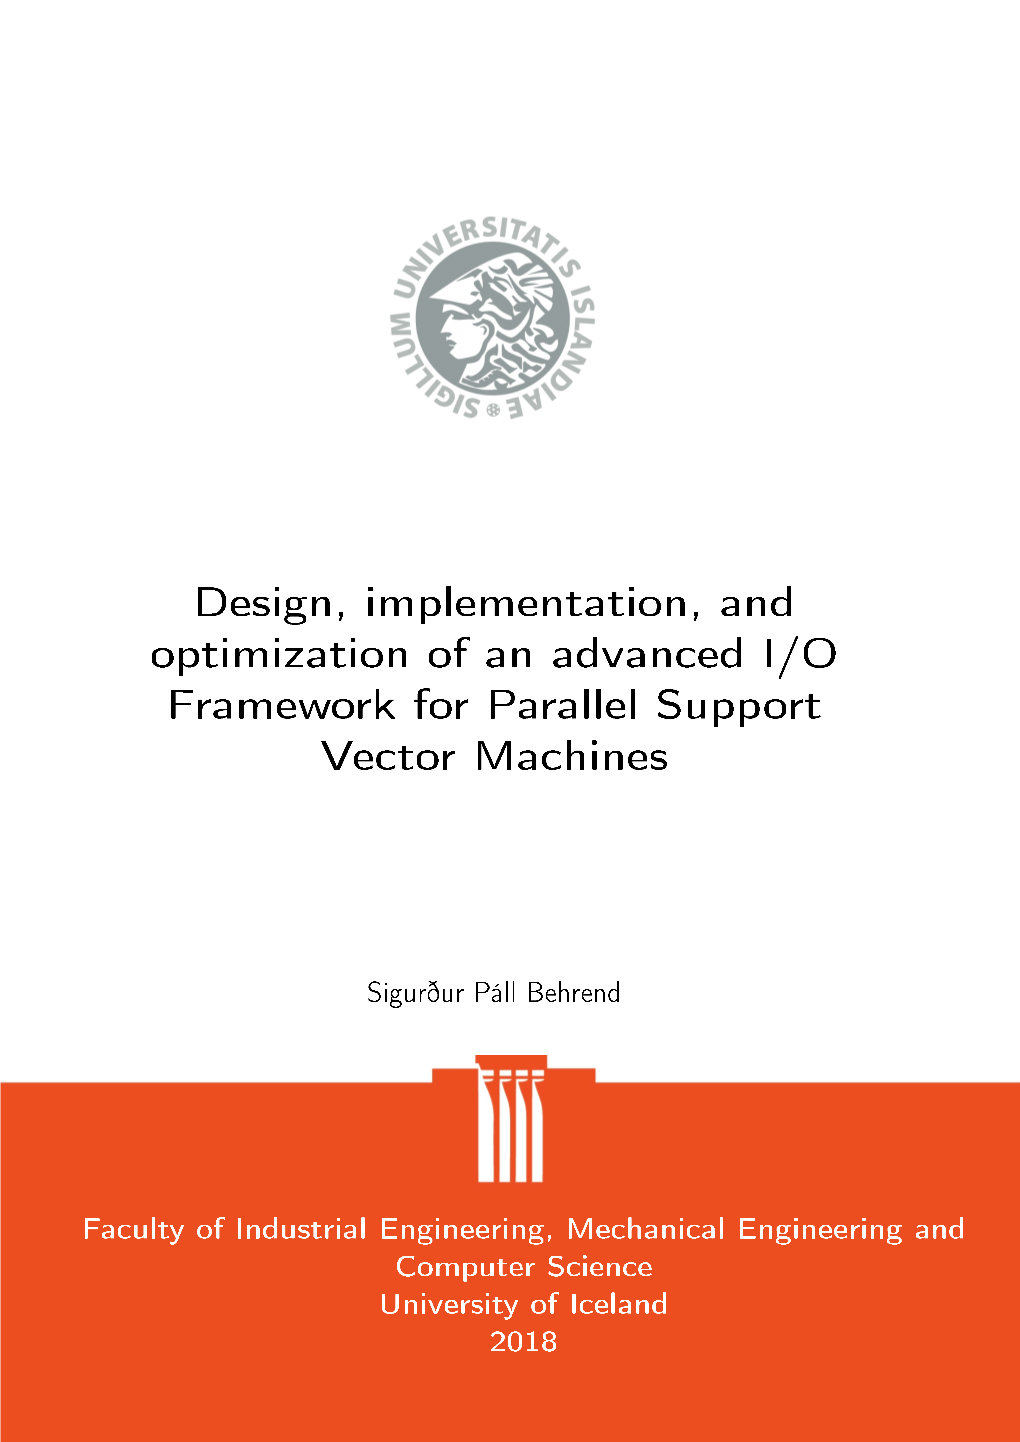 Design, Implementation, and Optimization of an Advanced I/O Framework for Parallel Support Vector Machines